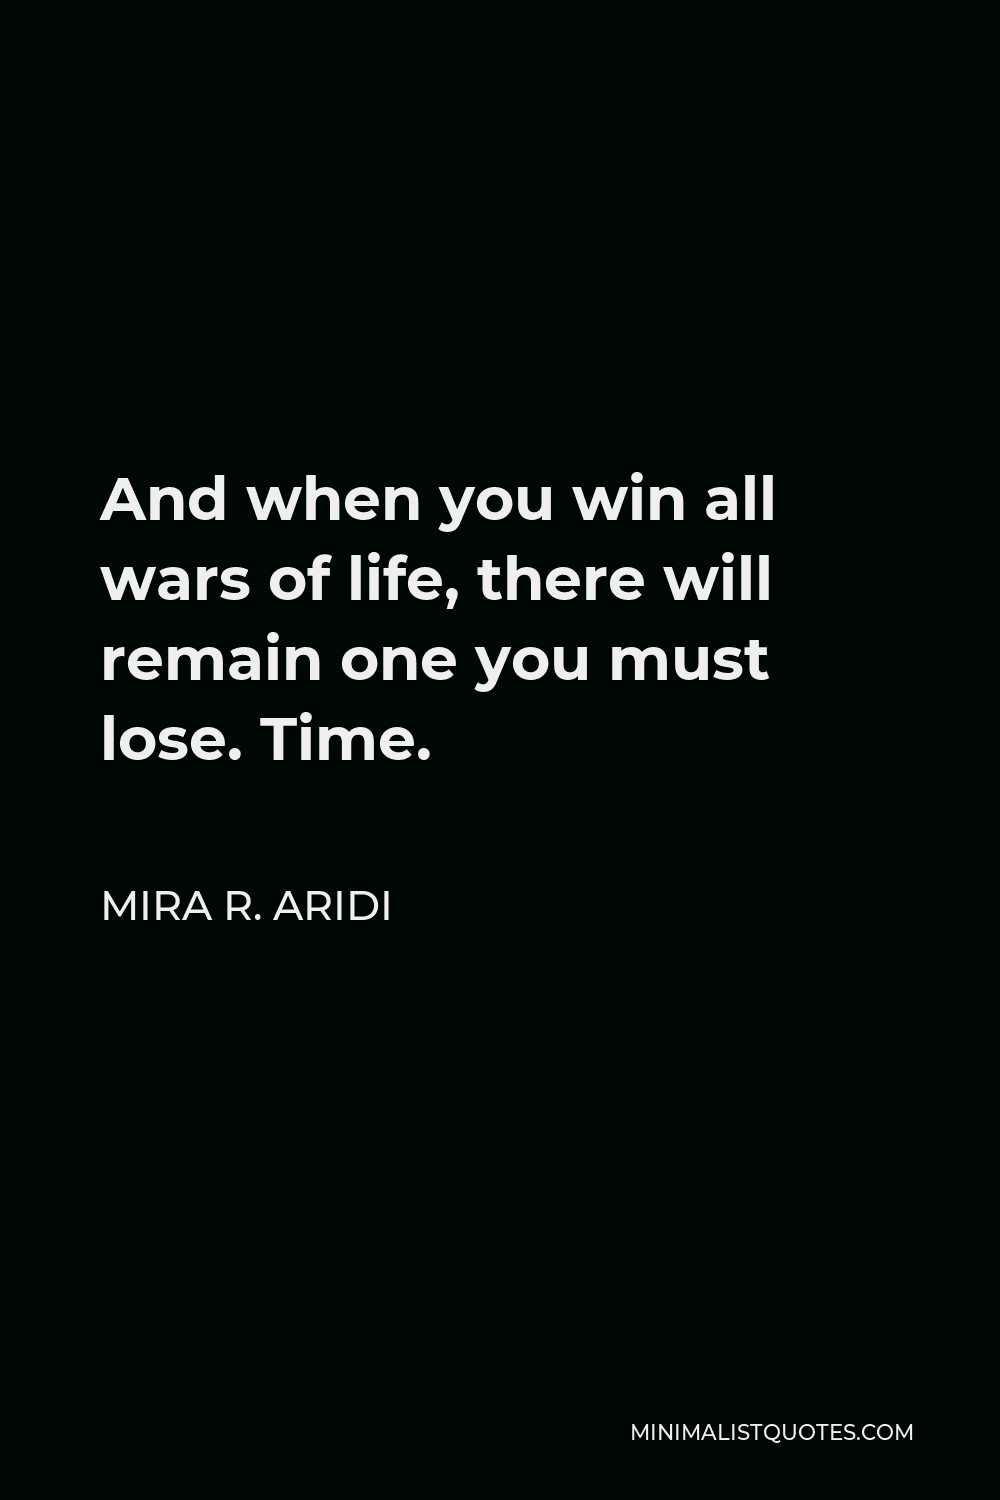 Mira R. Aridi Quote - And when you win all wars of life, there will remain one you must lose. Time.